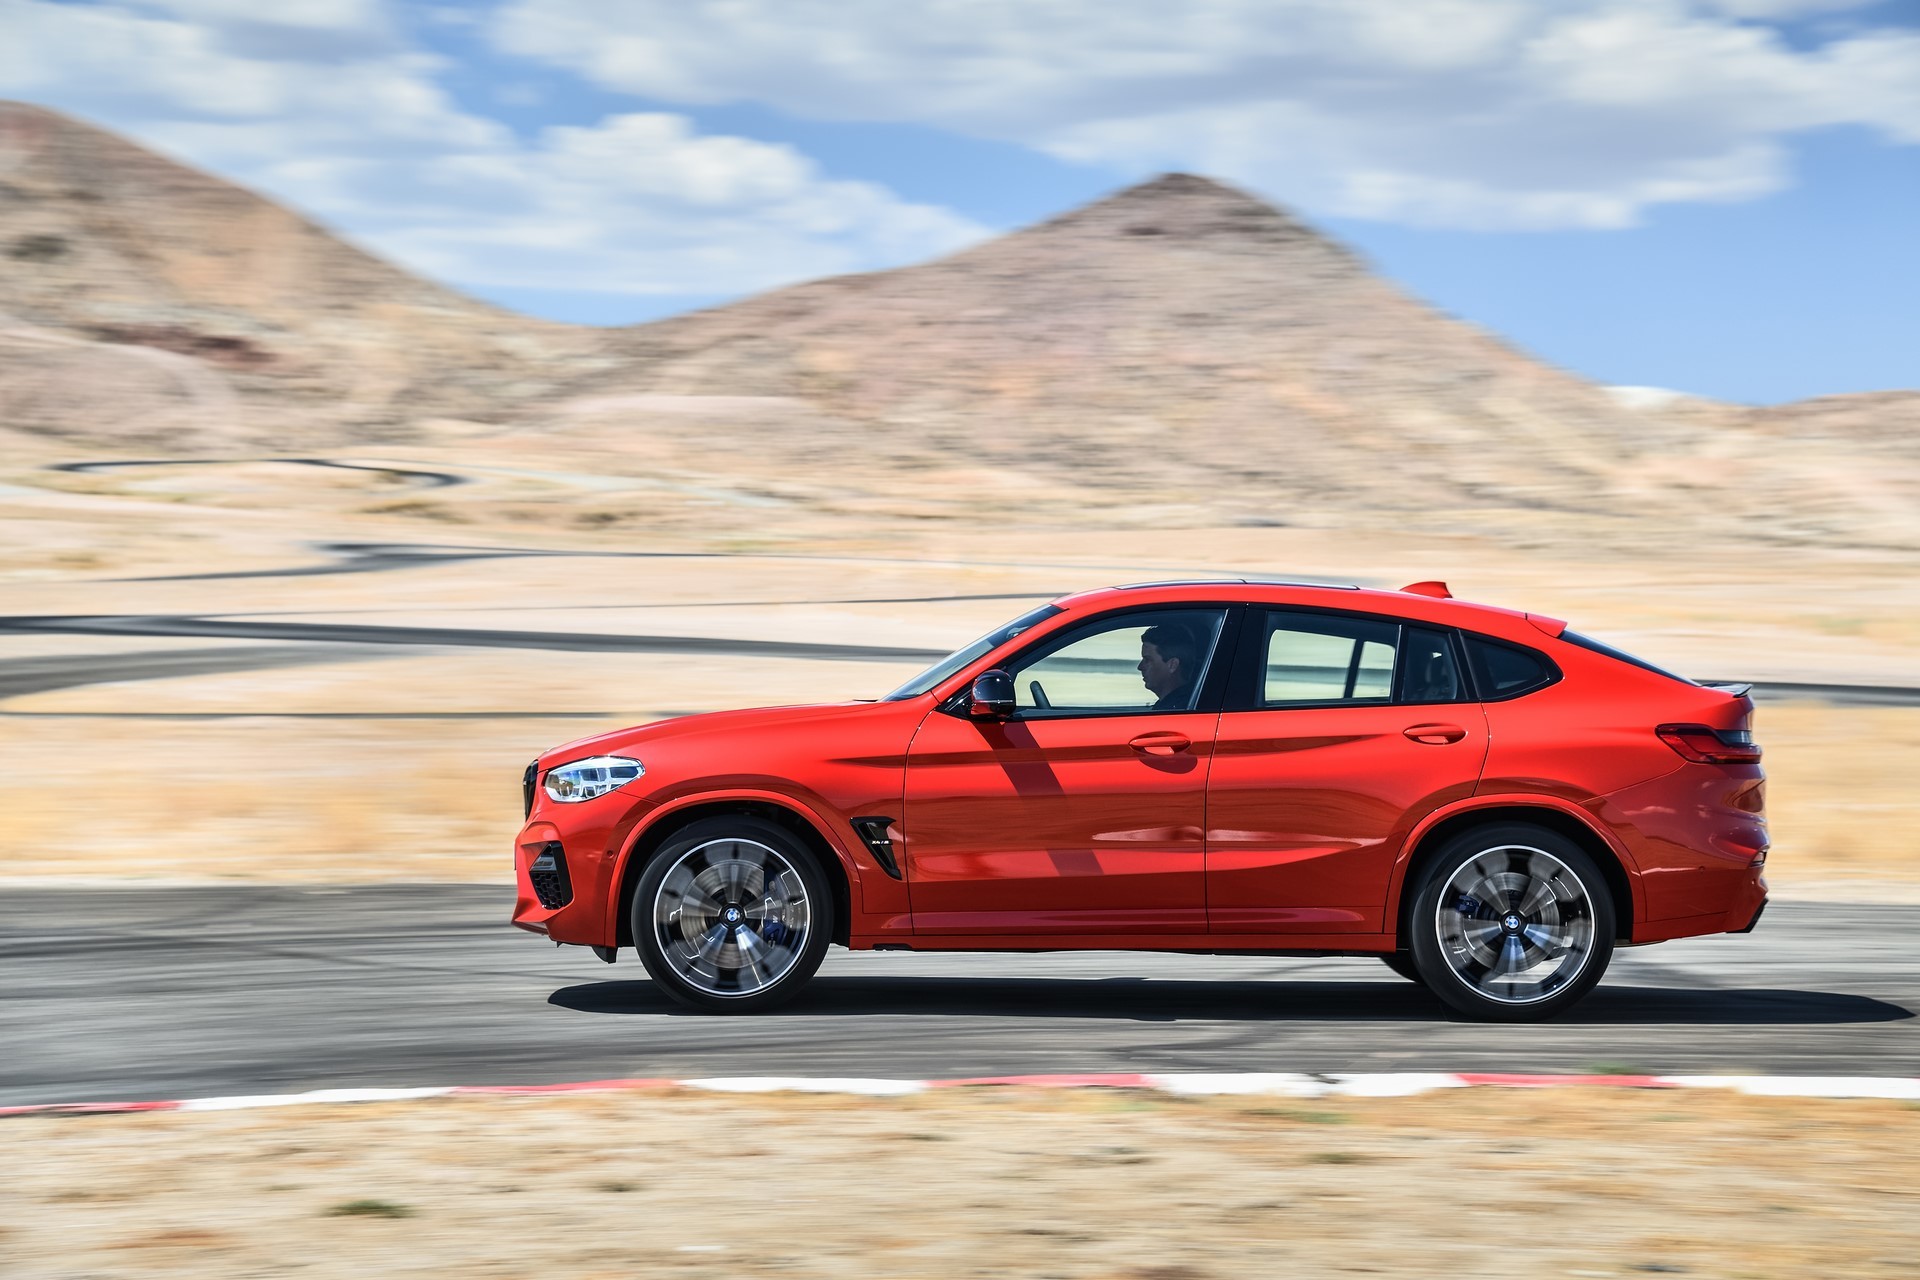 BMW X3 M and X4 M 2019 (80)